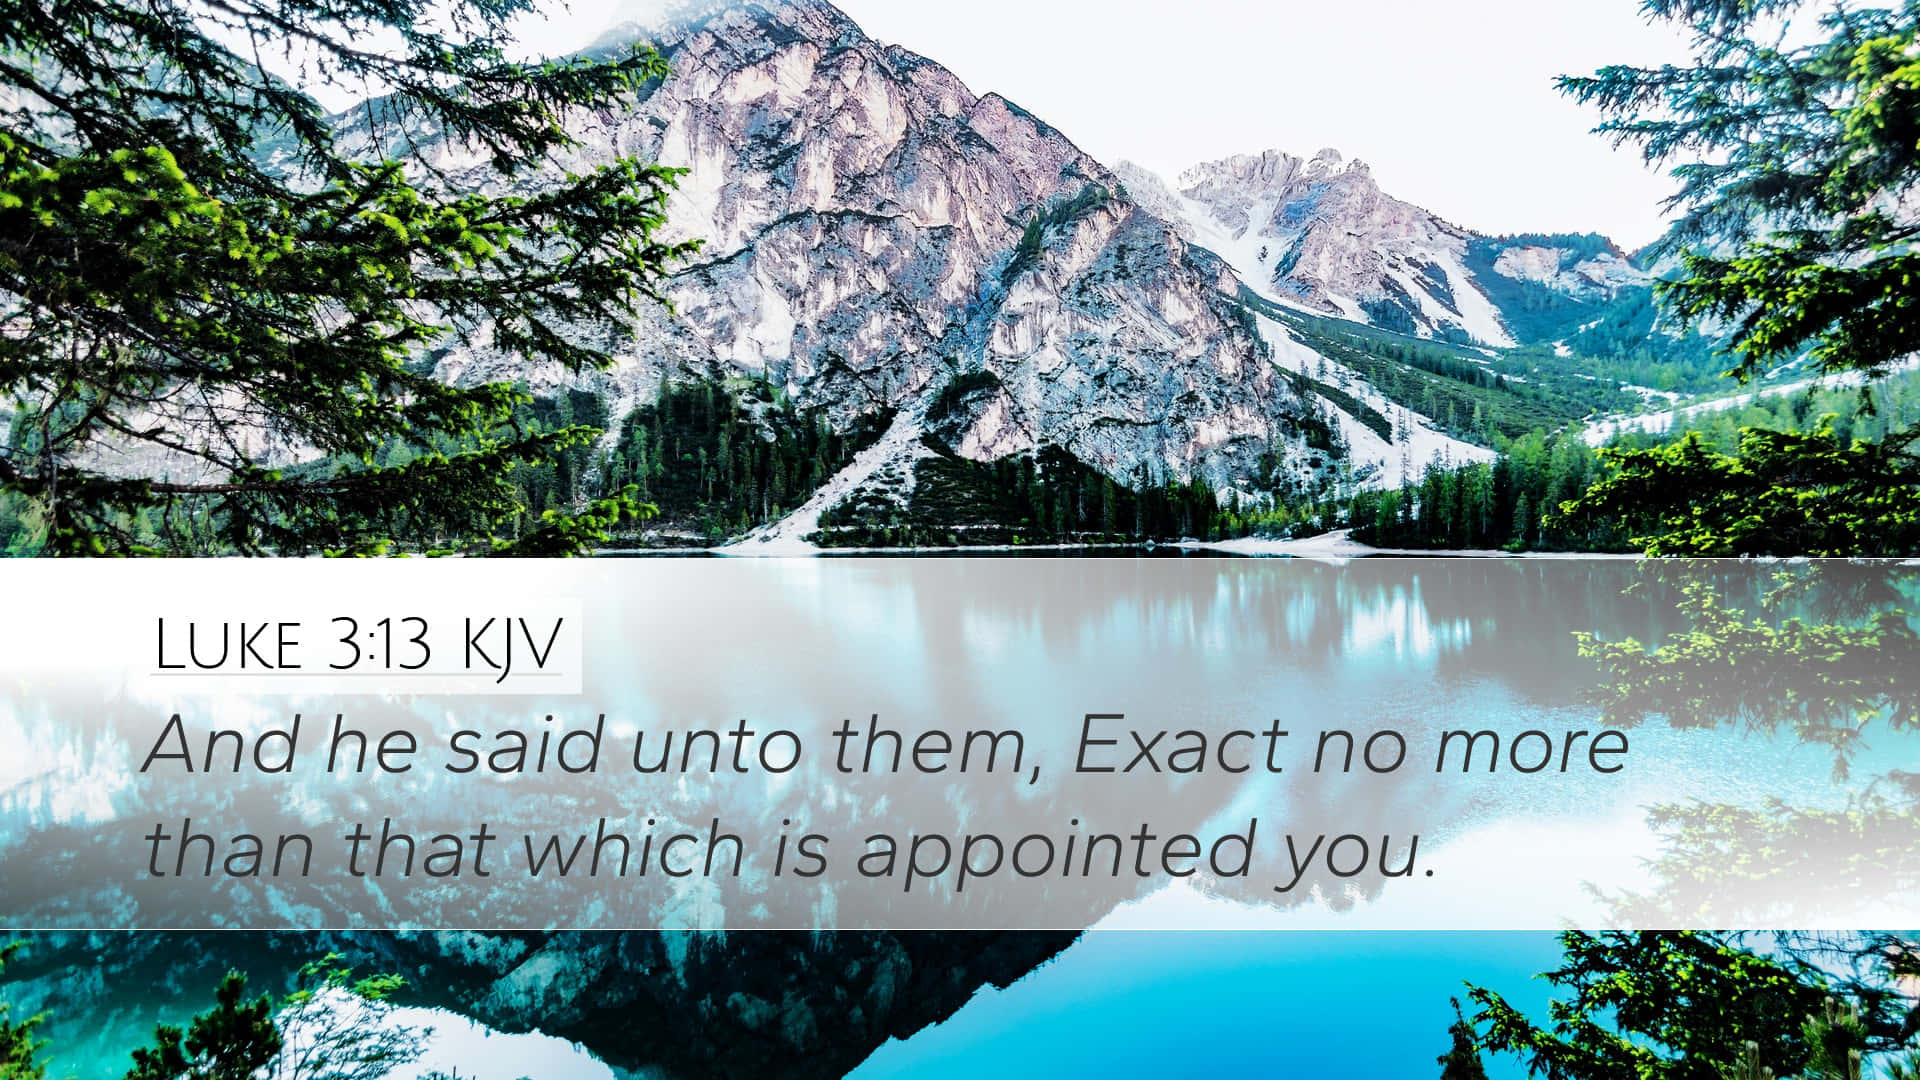 Bible Verse From Luck About Exact Things Appointed To You Wallpaper